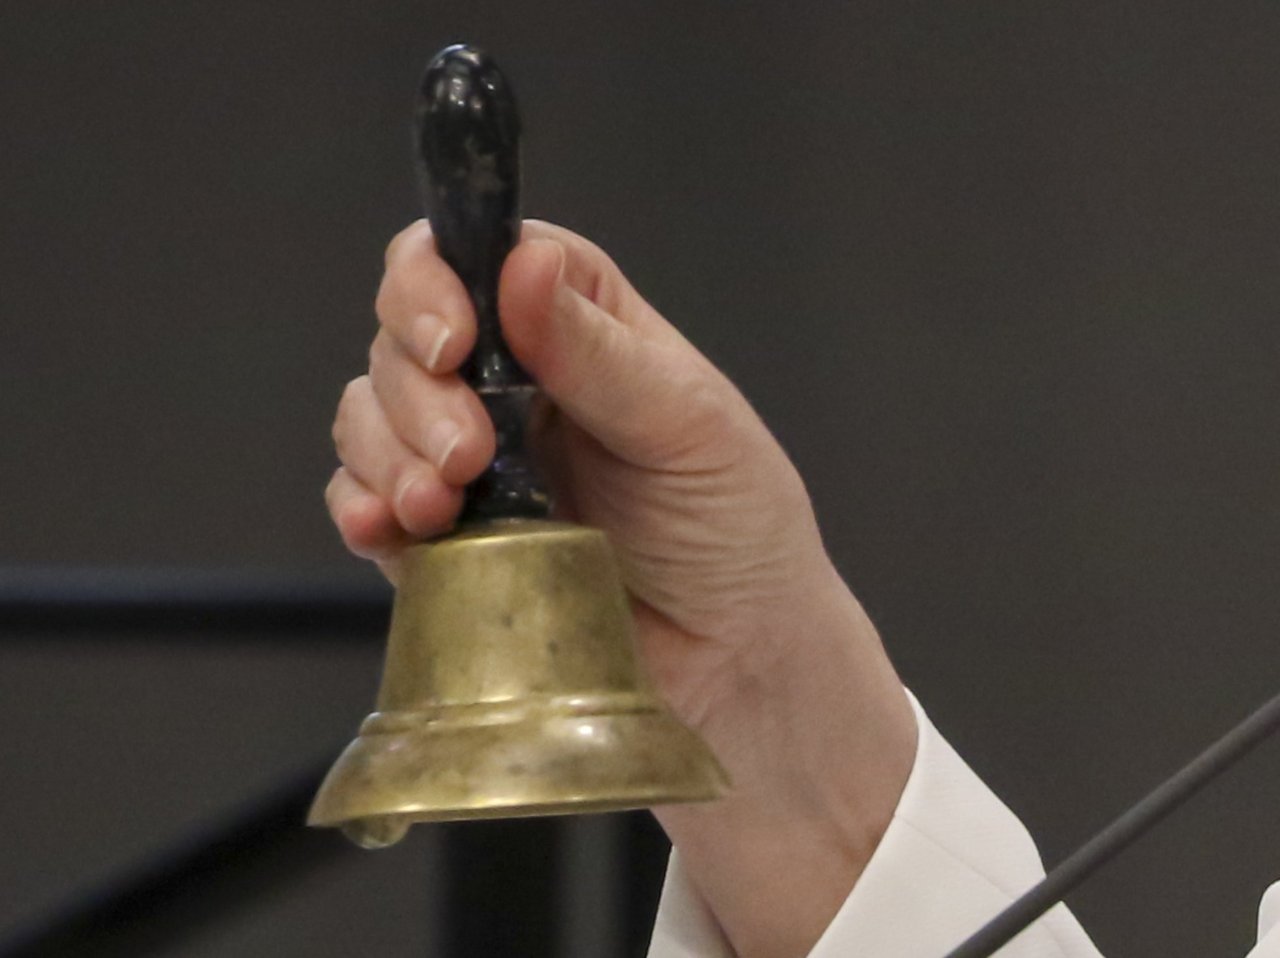 The Speaker of the State Parliament uses a bell to bring the plenary session to order. 